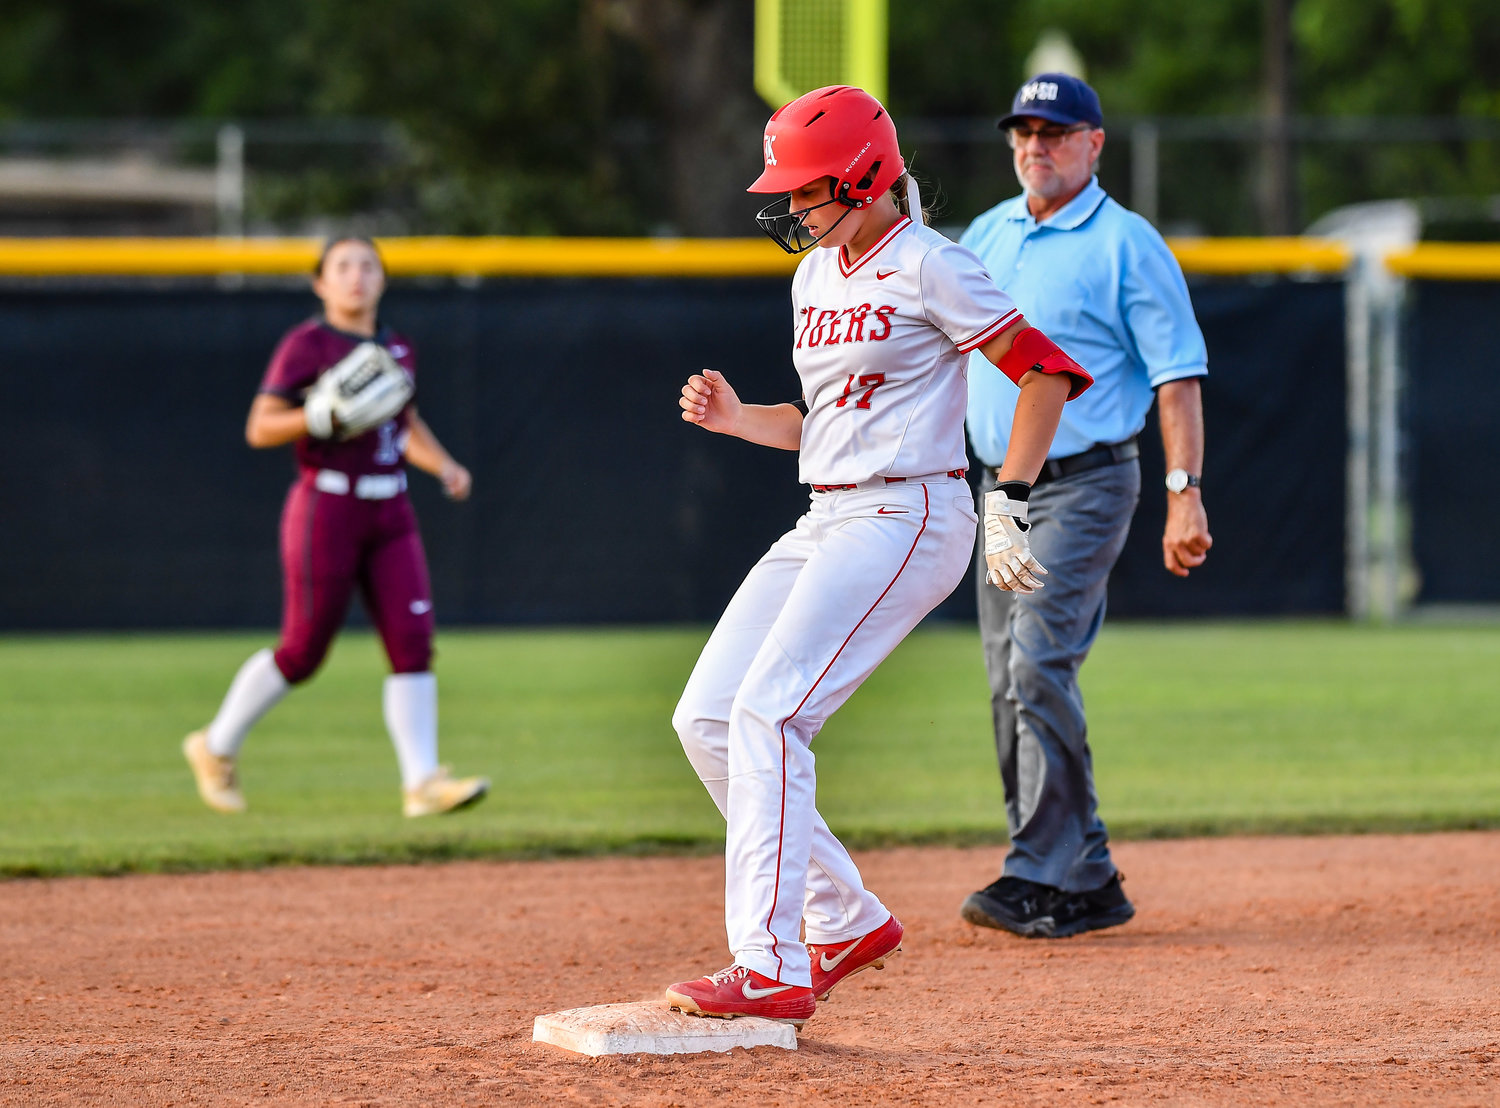 May 13, 2022: Katy's Montgomery Henderson #17 reaches second base for a standup double during the Regional Quarterfinal playoff between Katy and Cinco Ranch at Katy HS. (Photo by Mark Goodman / Katy Times)